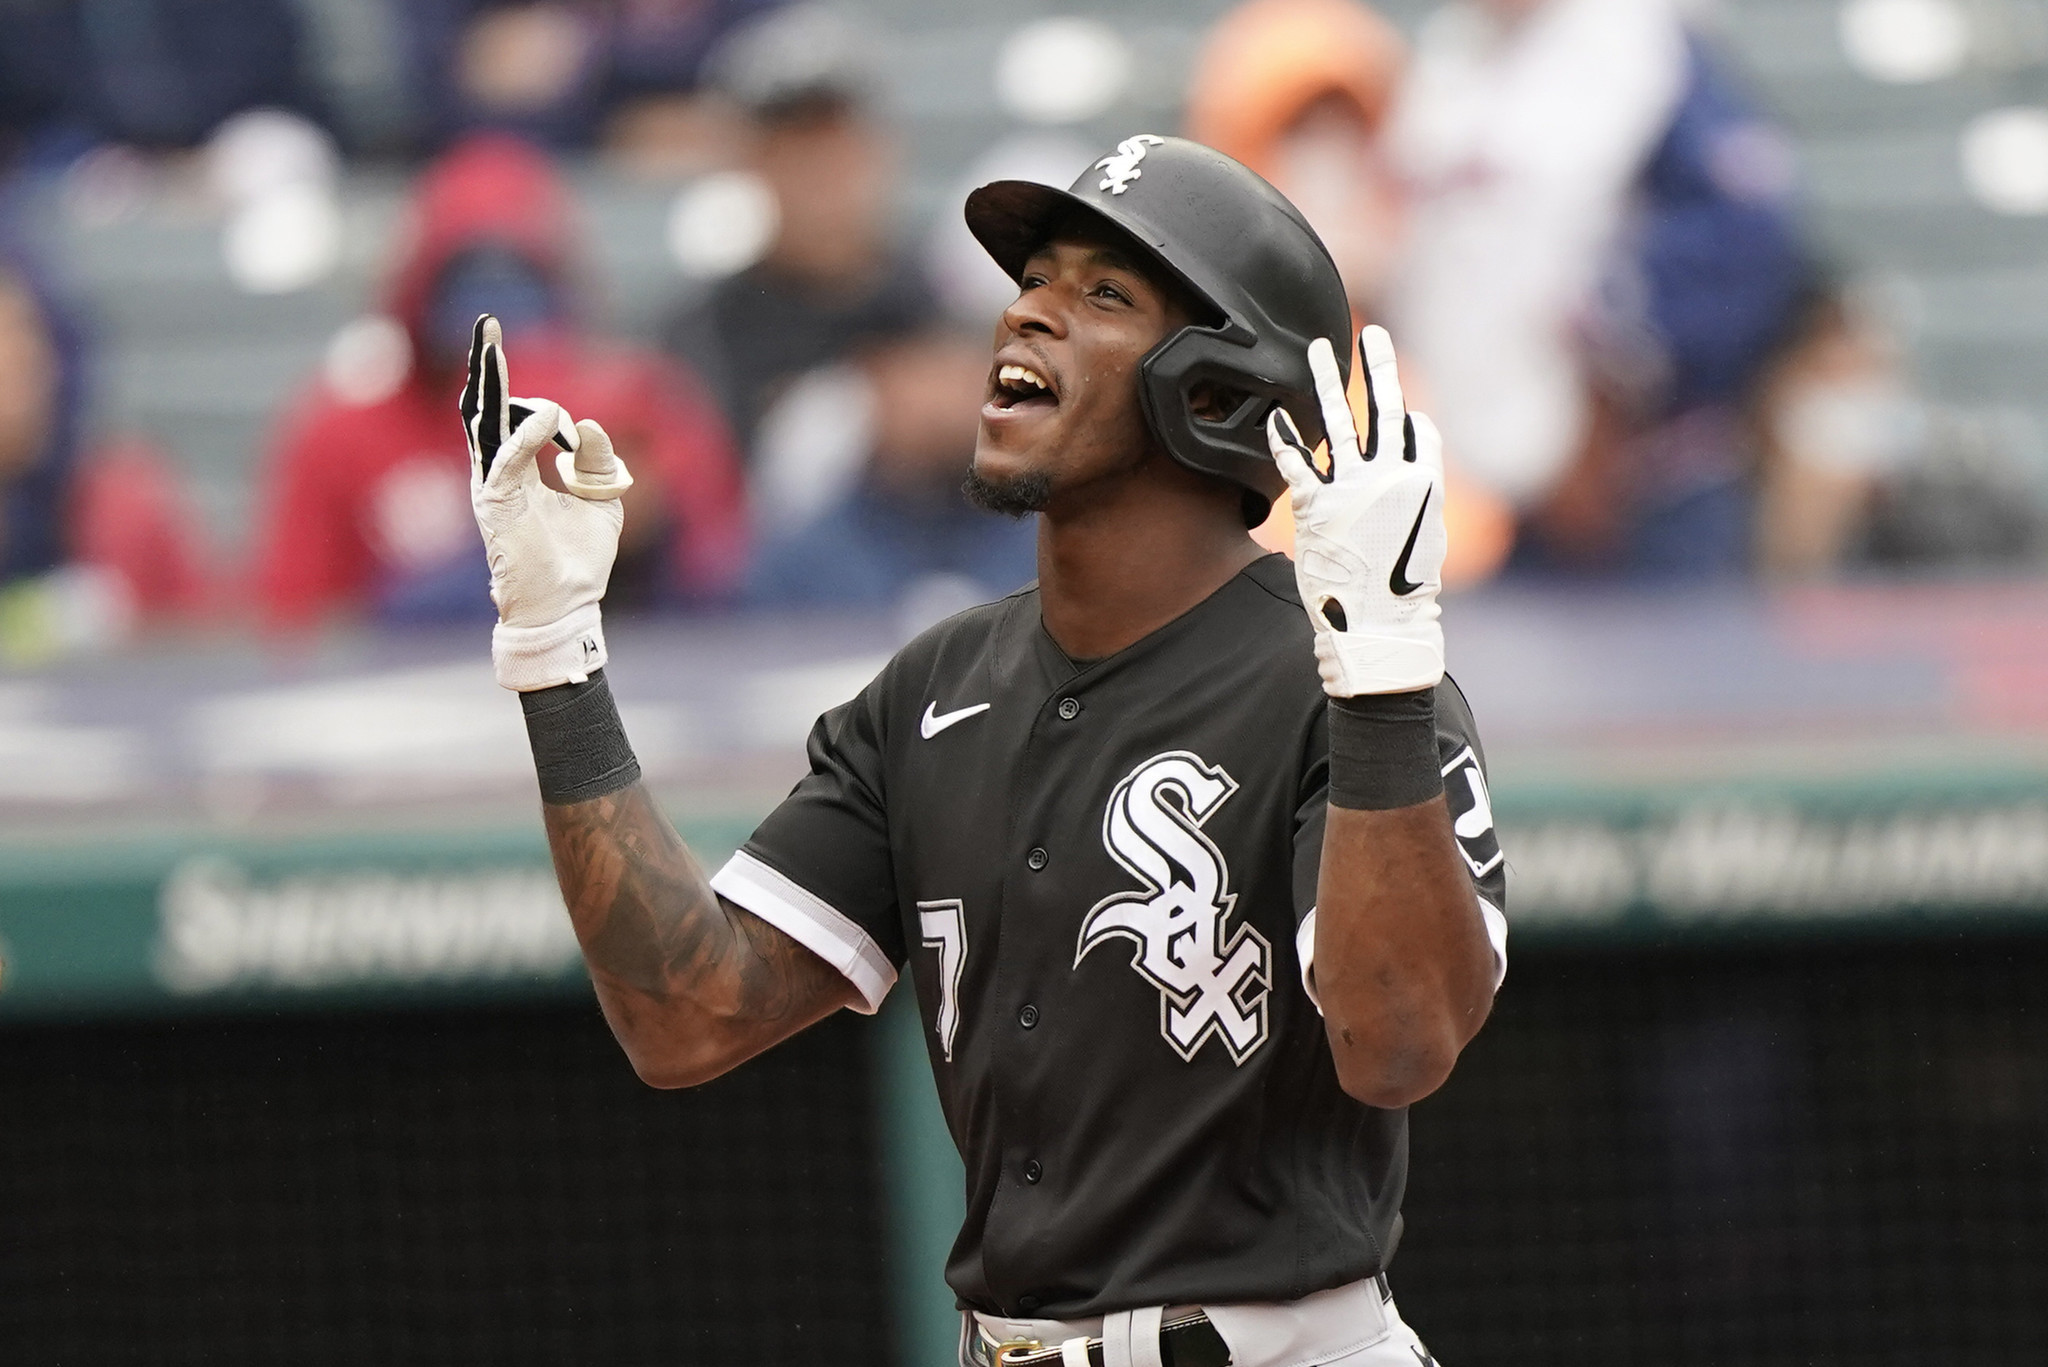 White Sox clinch AL Central title for 1st time since 2008